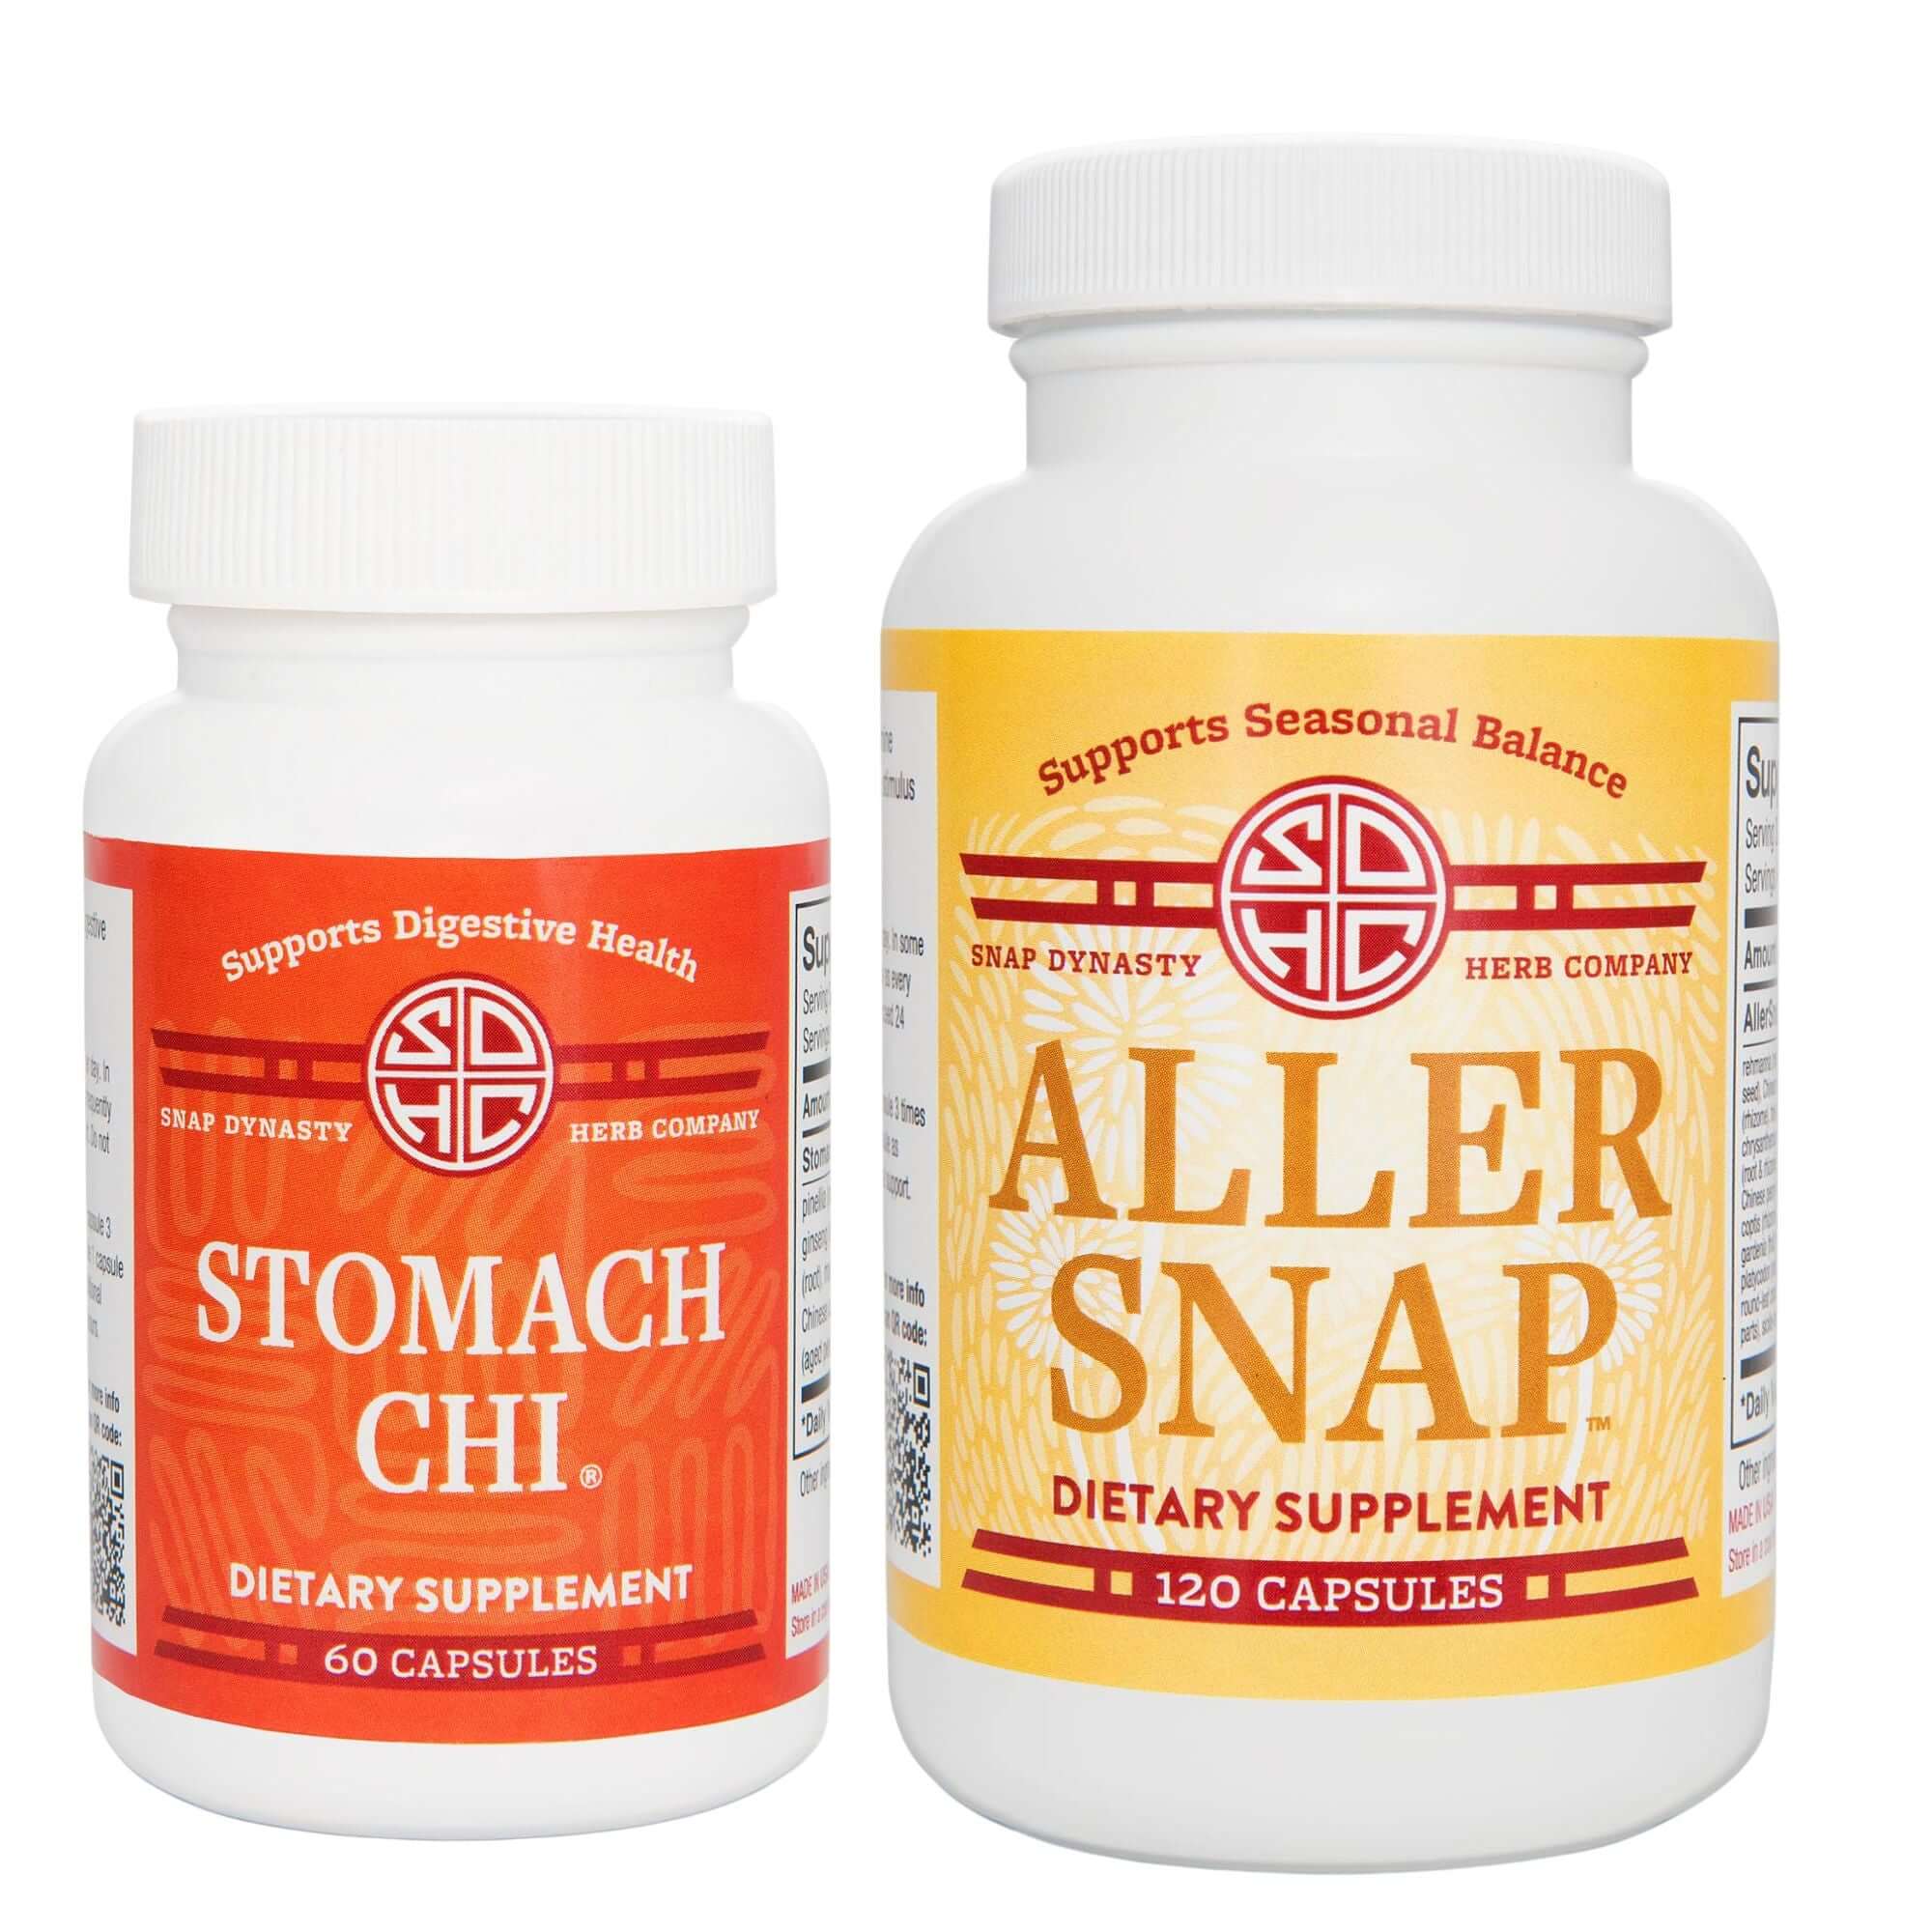 Bundle and Save! Stomach Chi and Aller Snap Capsules